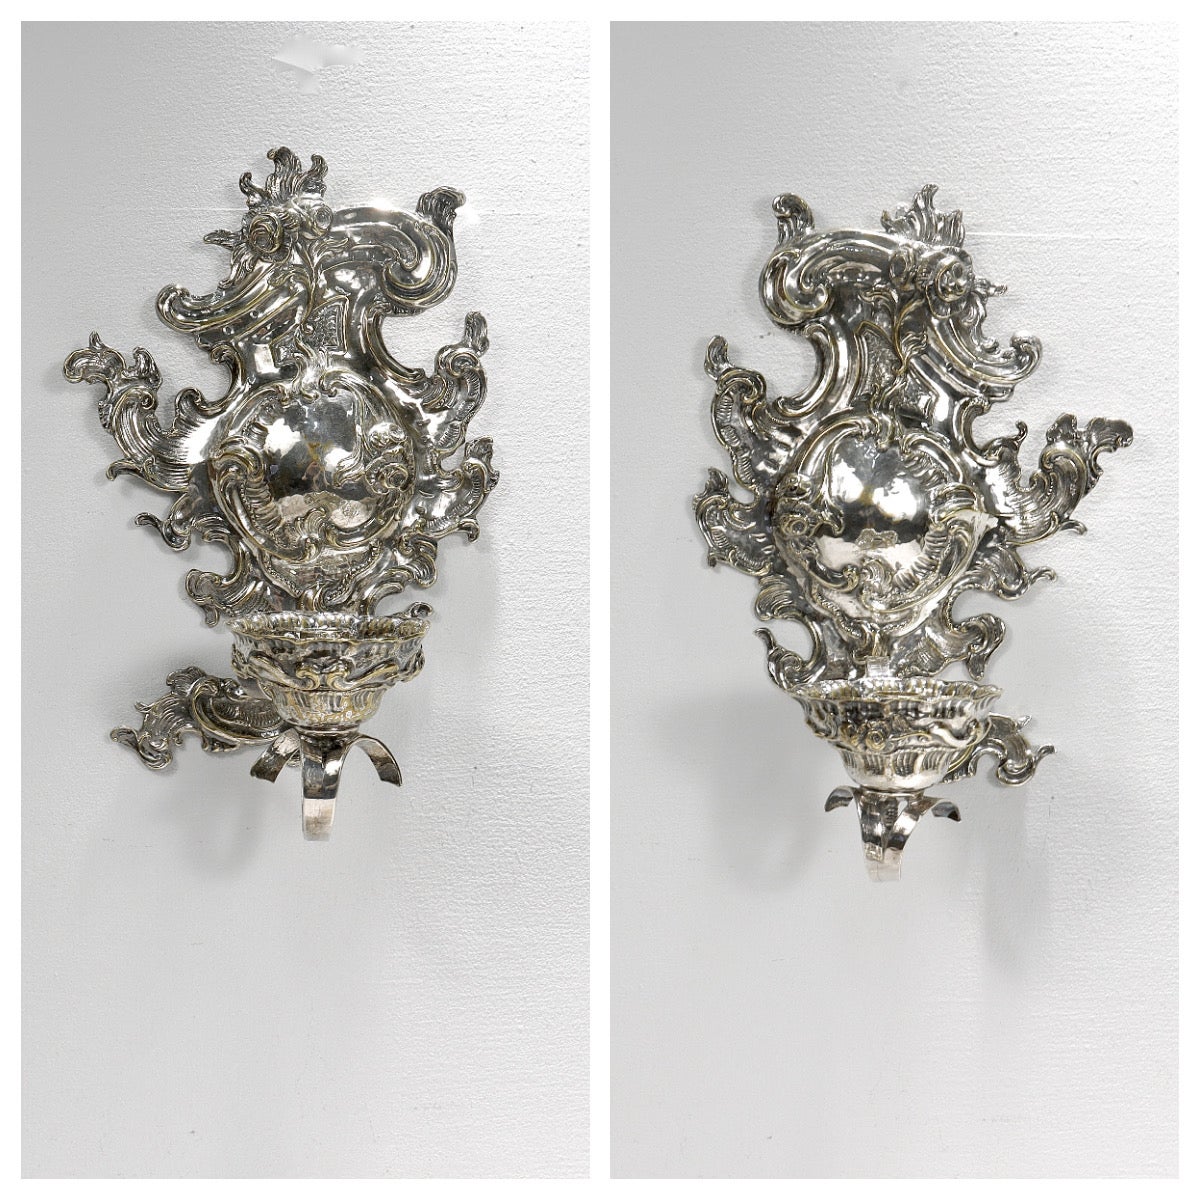 A fine pair of antique silver plated sconces.

From the Rococo Revival period (or quite possibly from the Rococo period itself.) 

Each ornately decorated with rocaille swags and embossed floral decoration.

The candle cups are removable from